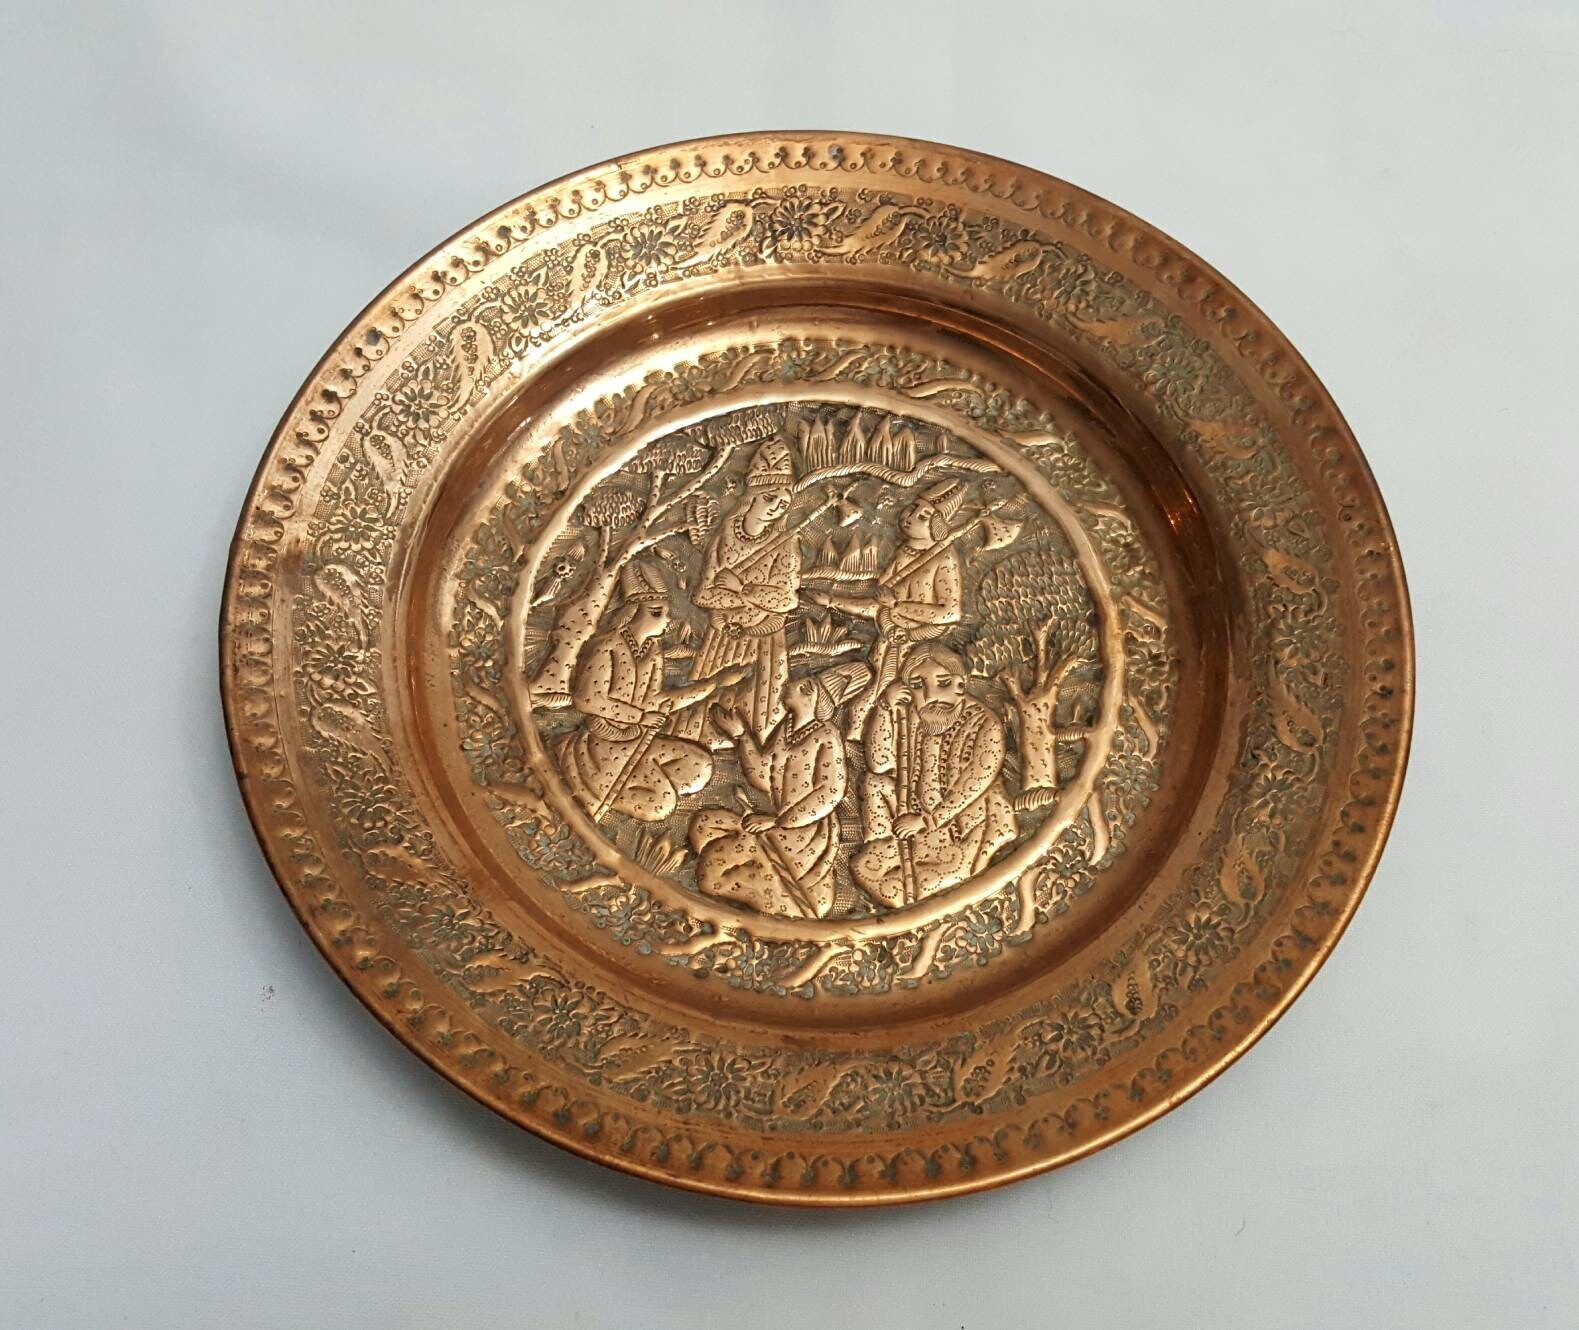 Vintage Hand Stamped Repousse Copper Plate 11 Diameter with Bird Designs,  Possibly Egyptian Made